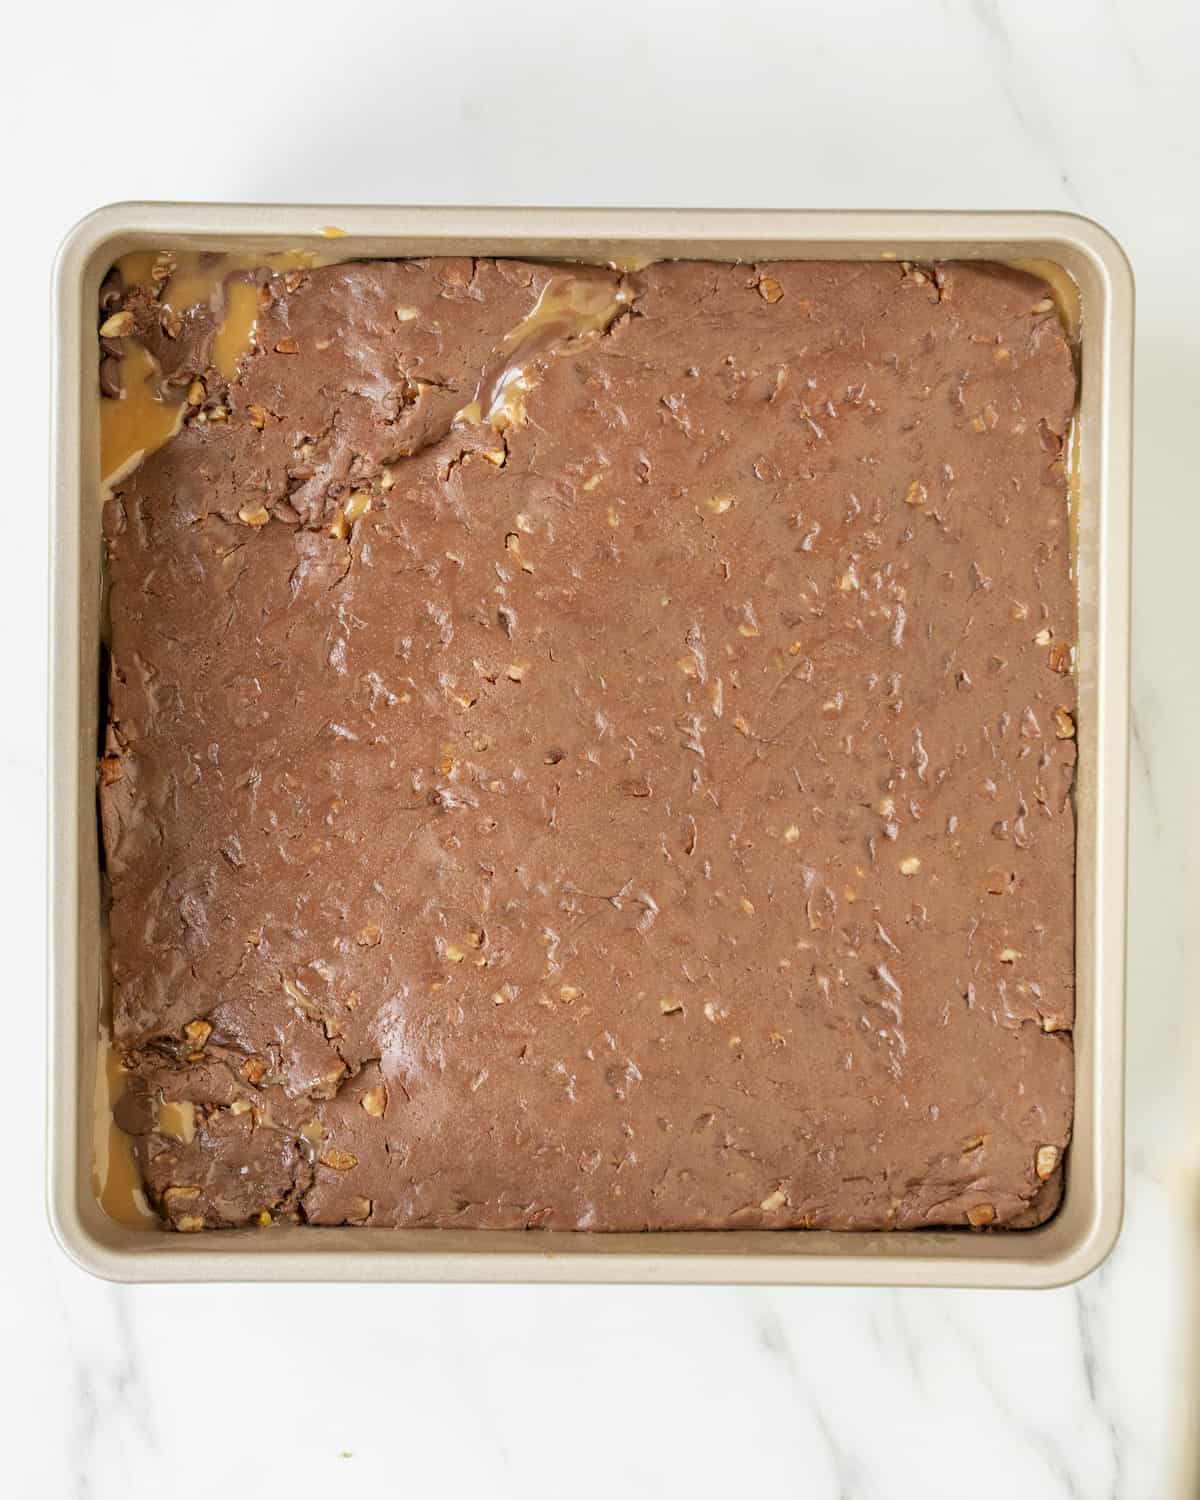 The unused brownie dough has been placed on top of the chocolate chip caramel layer in the square baking pan.